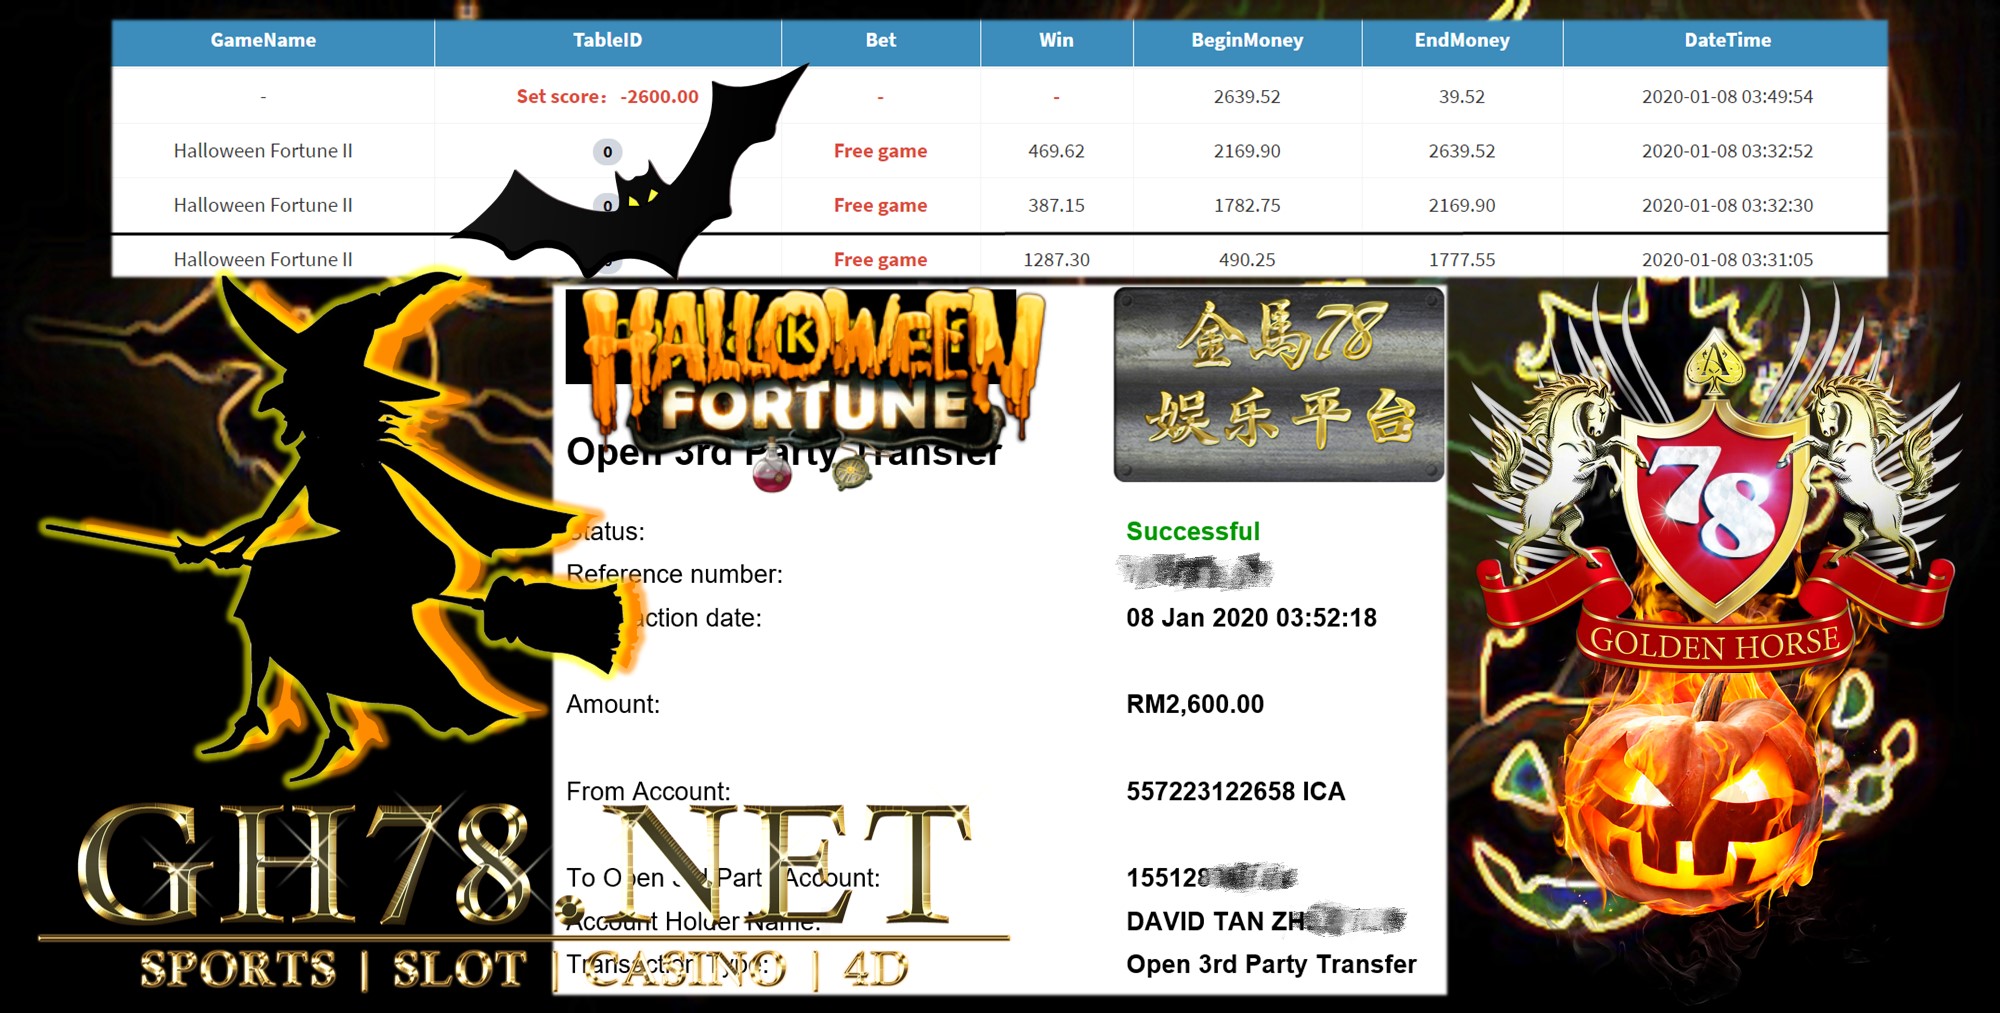 2020 NEW YEAR !!! MEMBER MAIN PUSSY888 FT.HALLOWEEN FORTUNE II WITHDRAW RM2600 !!!